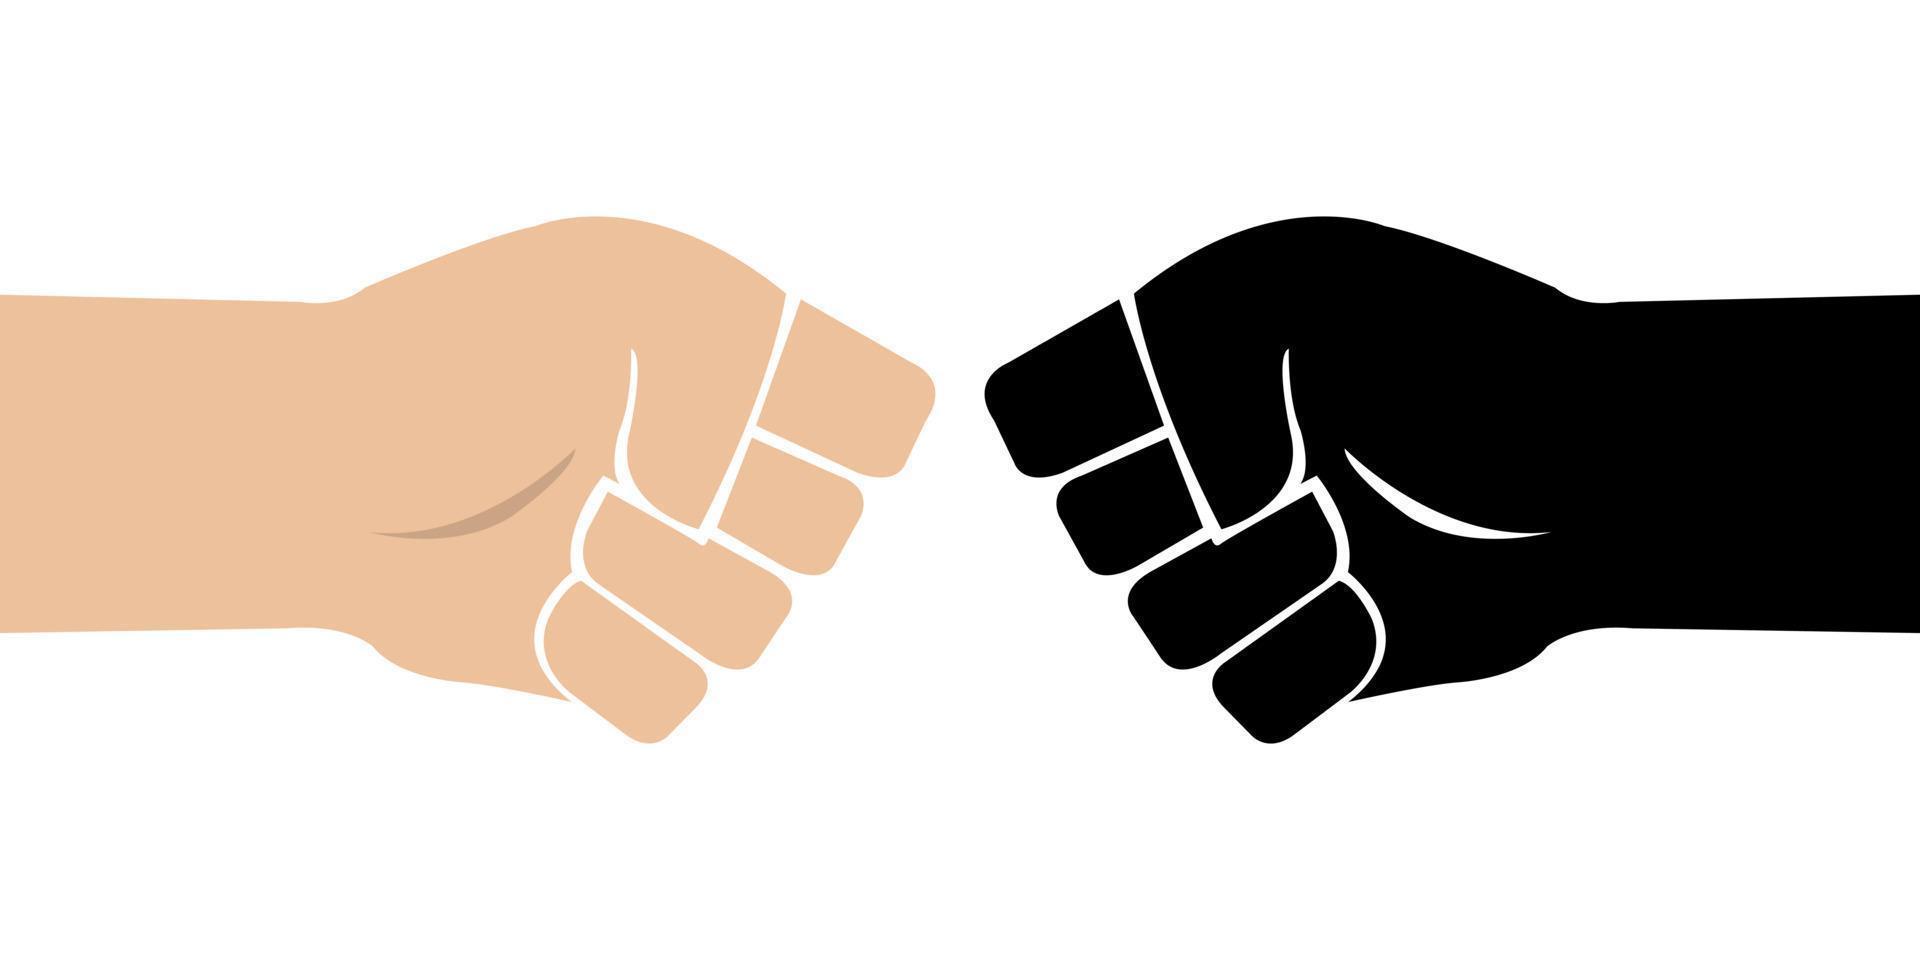 Fist bump icon The concept of power and conflict, competition, Team work, partnership, friendship, struggle. hands clenched fist punching or hitting. Two male hands Bro fist power bump gesture raised. vector